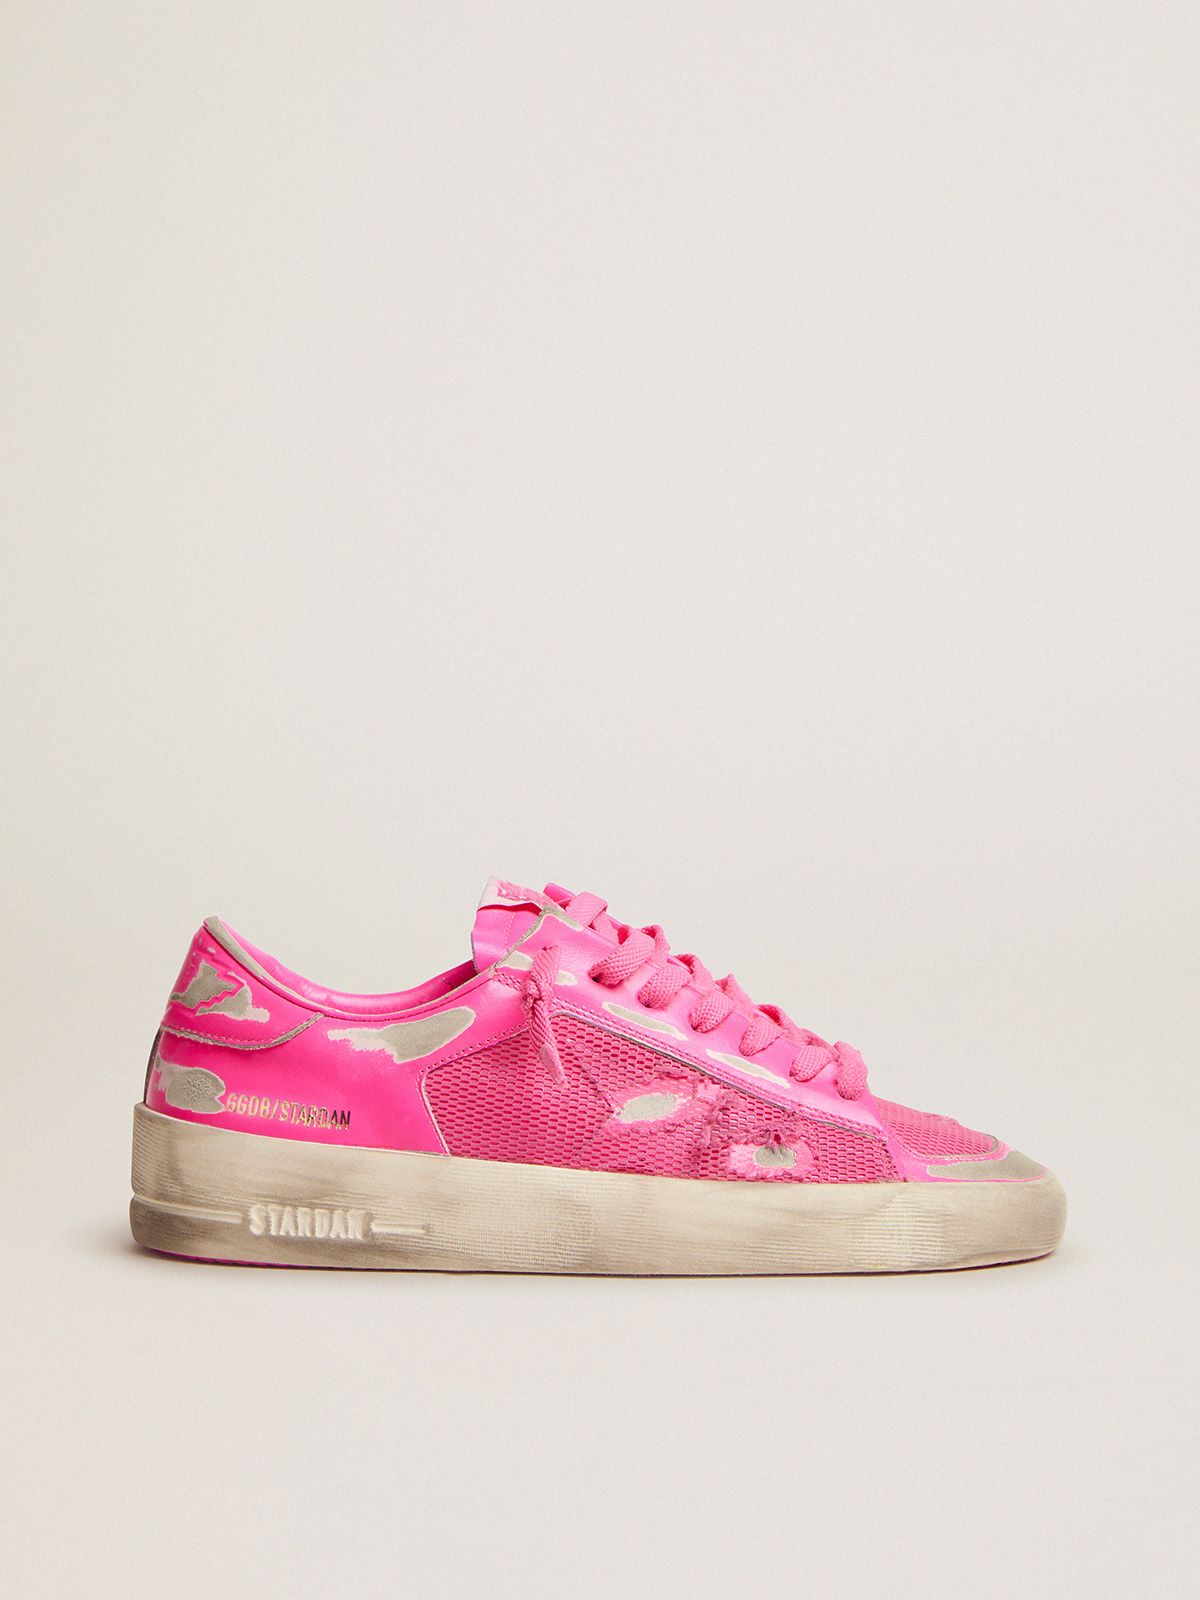 golden goose in Stardan leather fluorescent pink mesh sneakers and